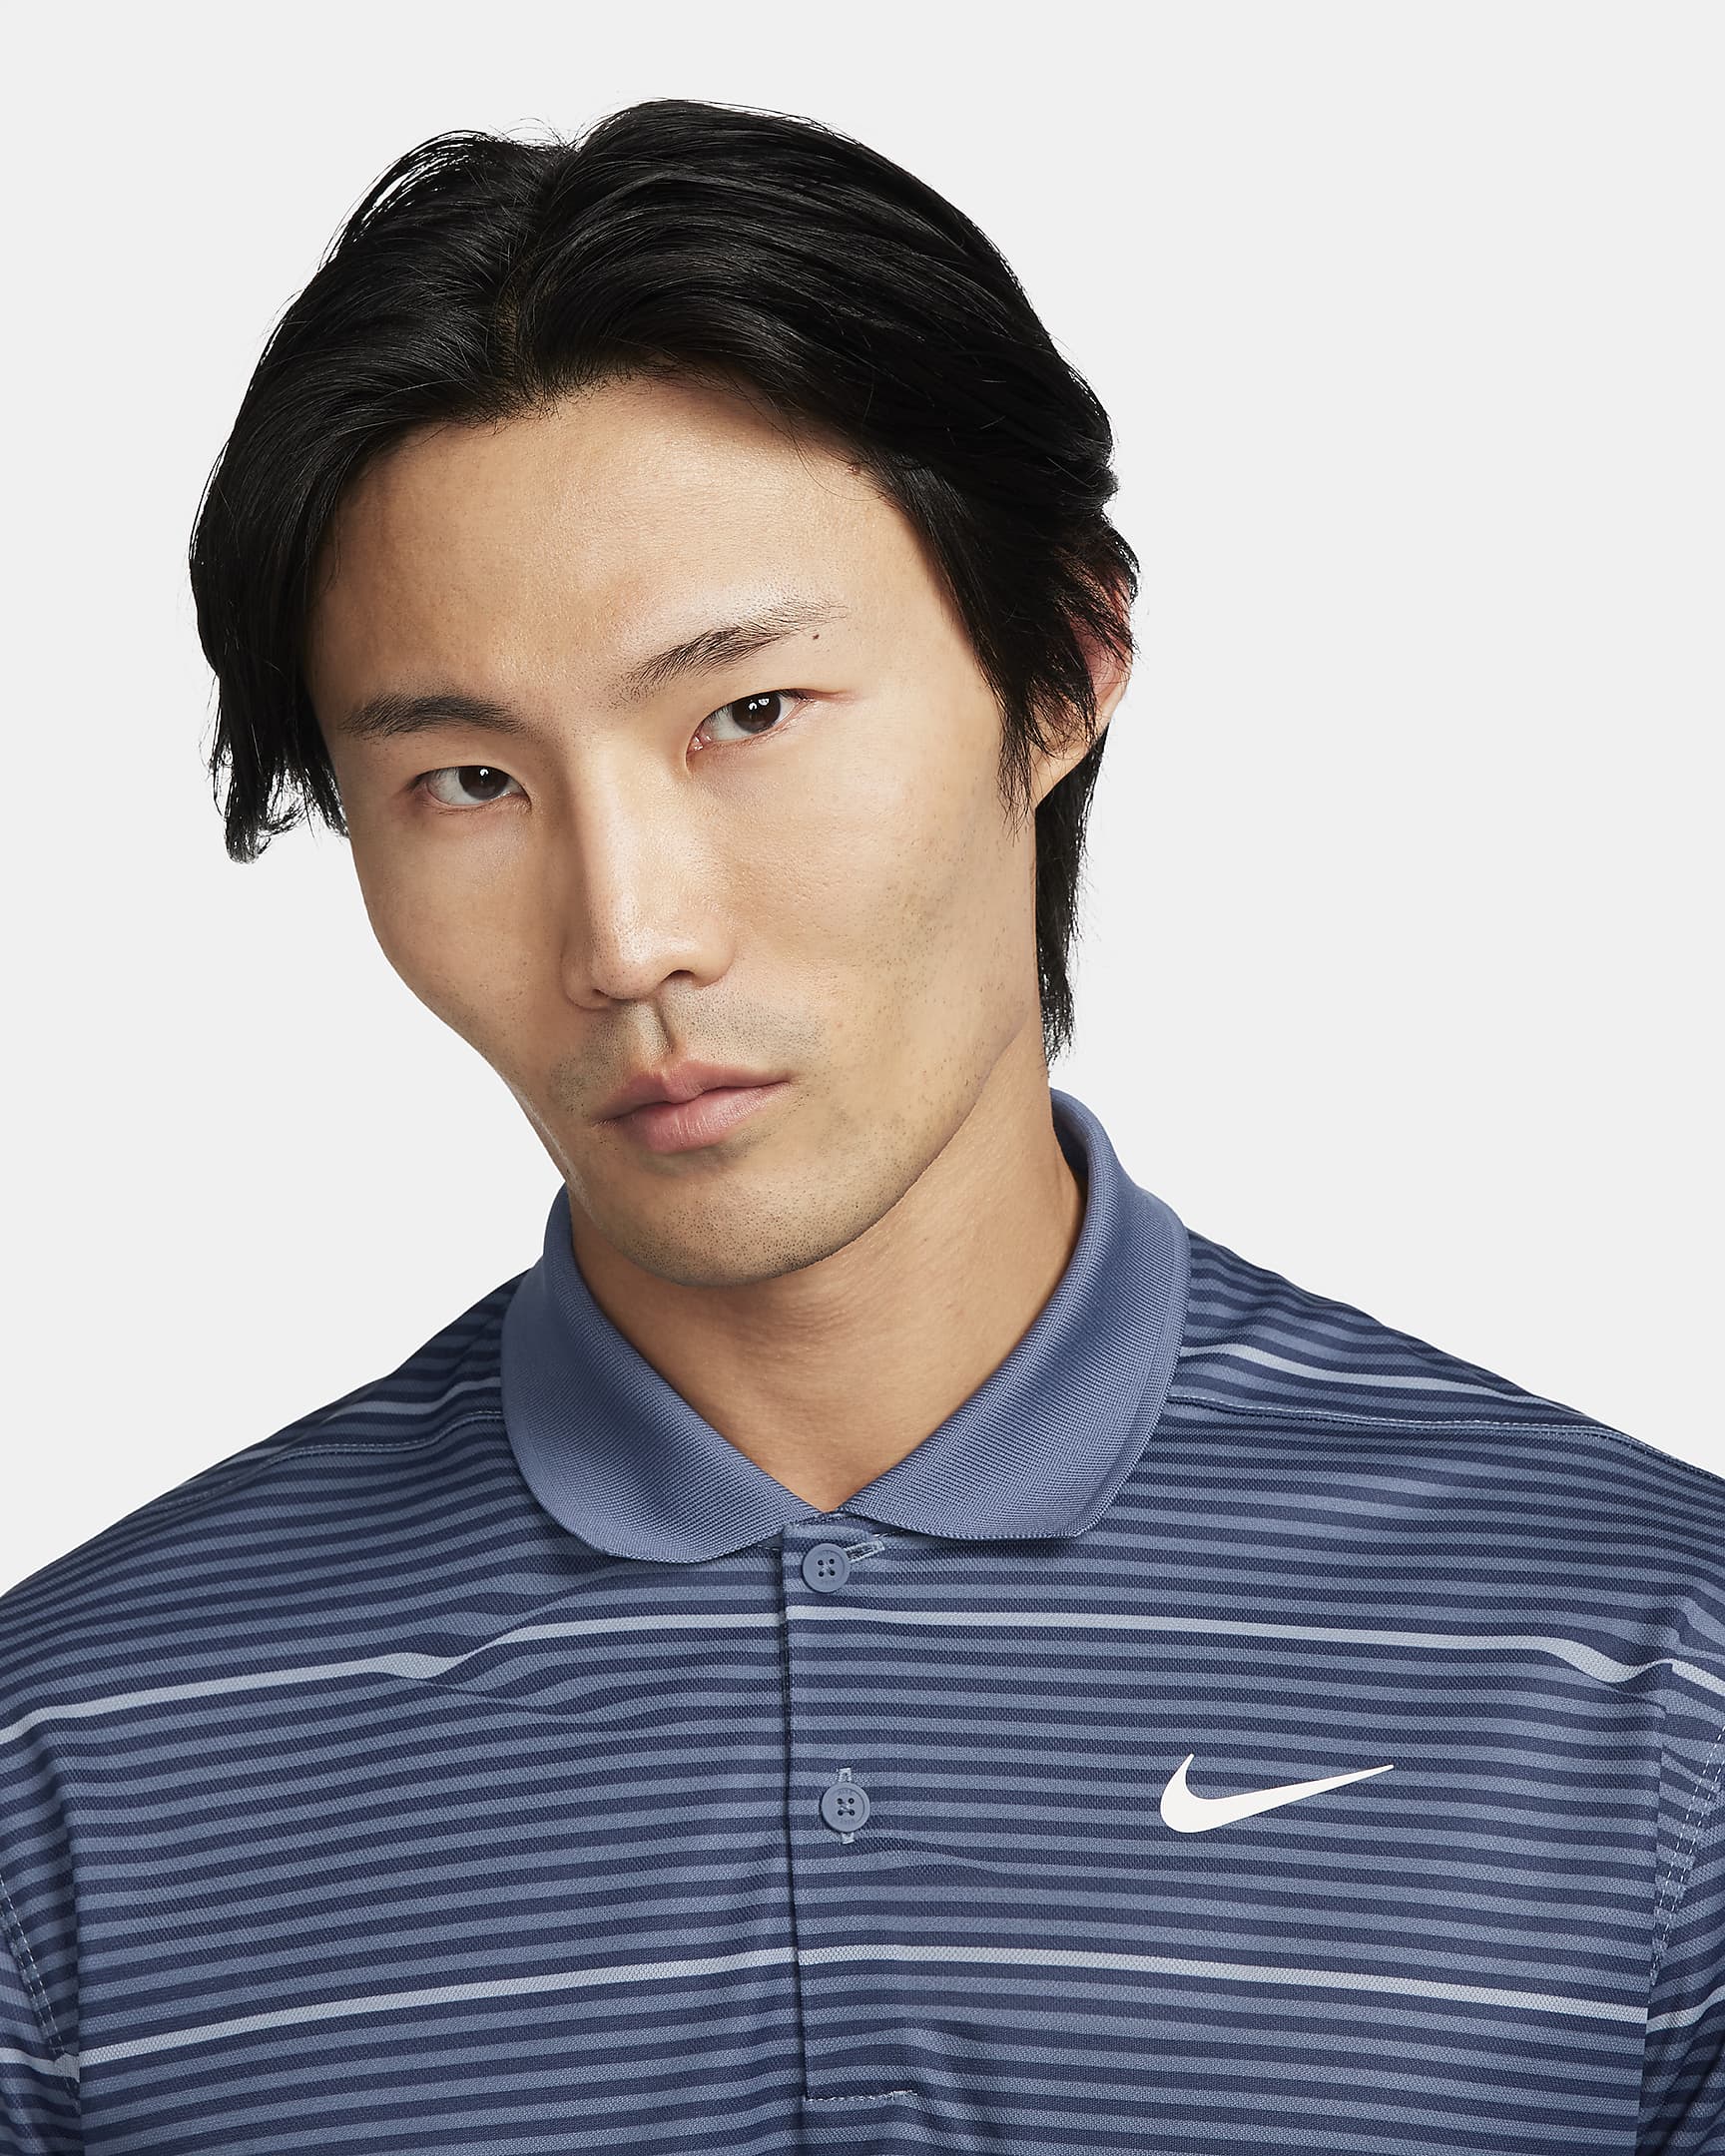 Nike Victory Men's Dri-FIT Golf Polo - Midnight Navy/Diffused Blue/White